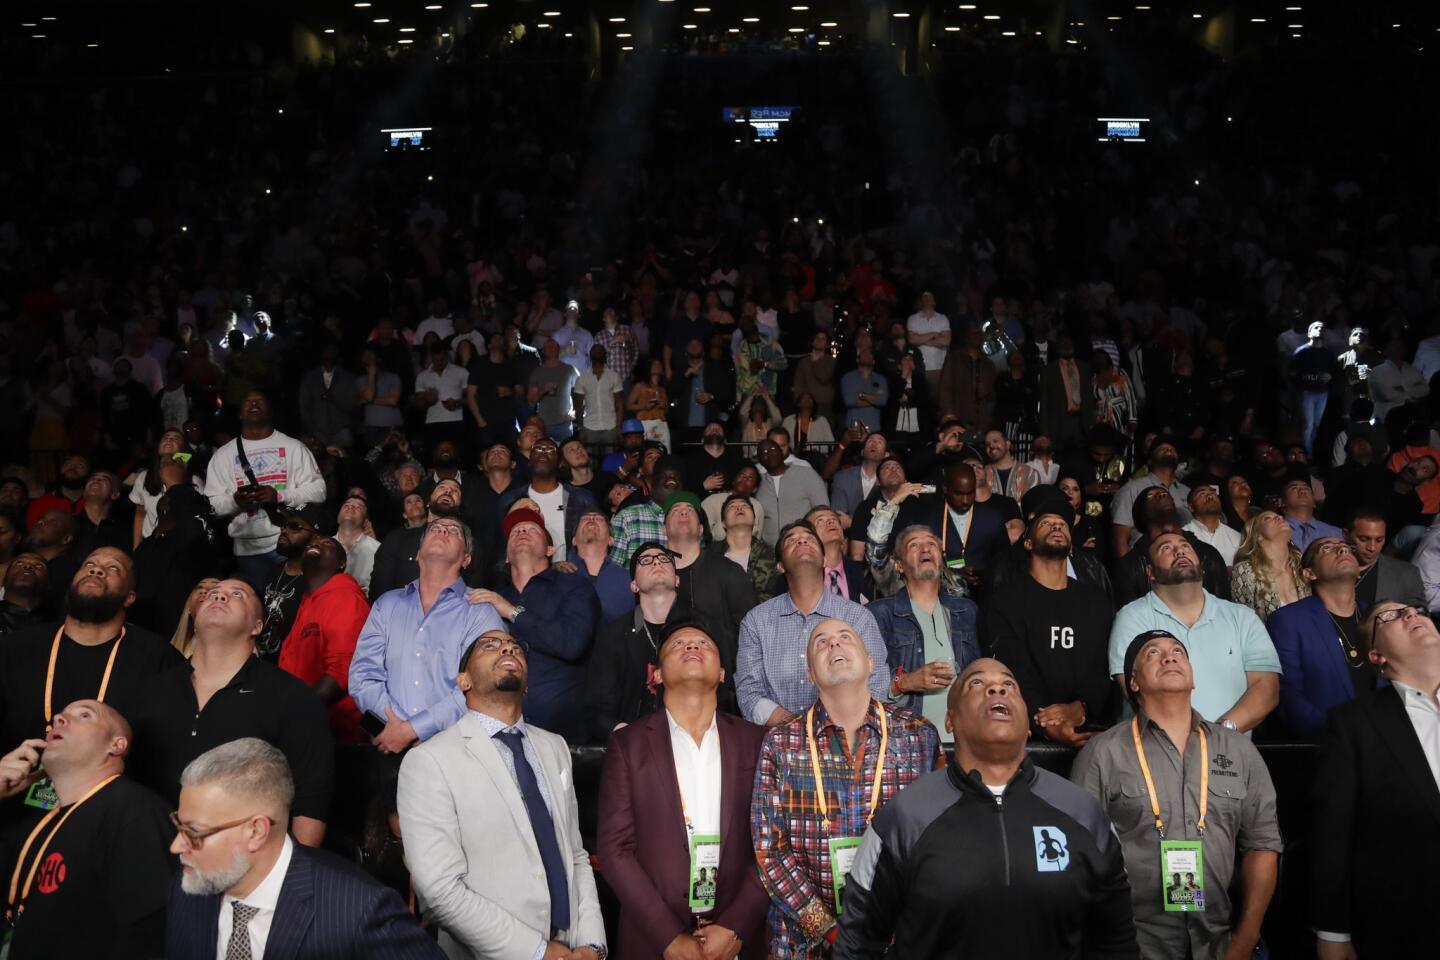 Fans watch the replay of the WBC heavyweight championship boxing match between Dominic Breazeale and Deontay Wilder on Saturday, May 18, 2019, in New York. Wilder won in the first round.